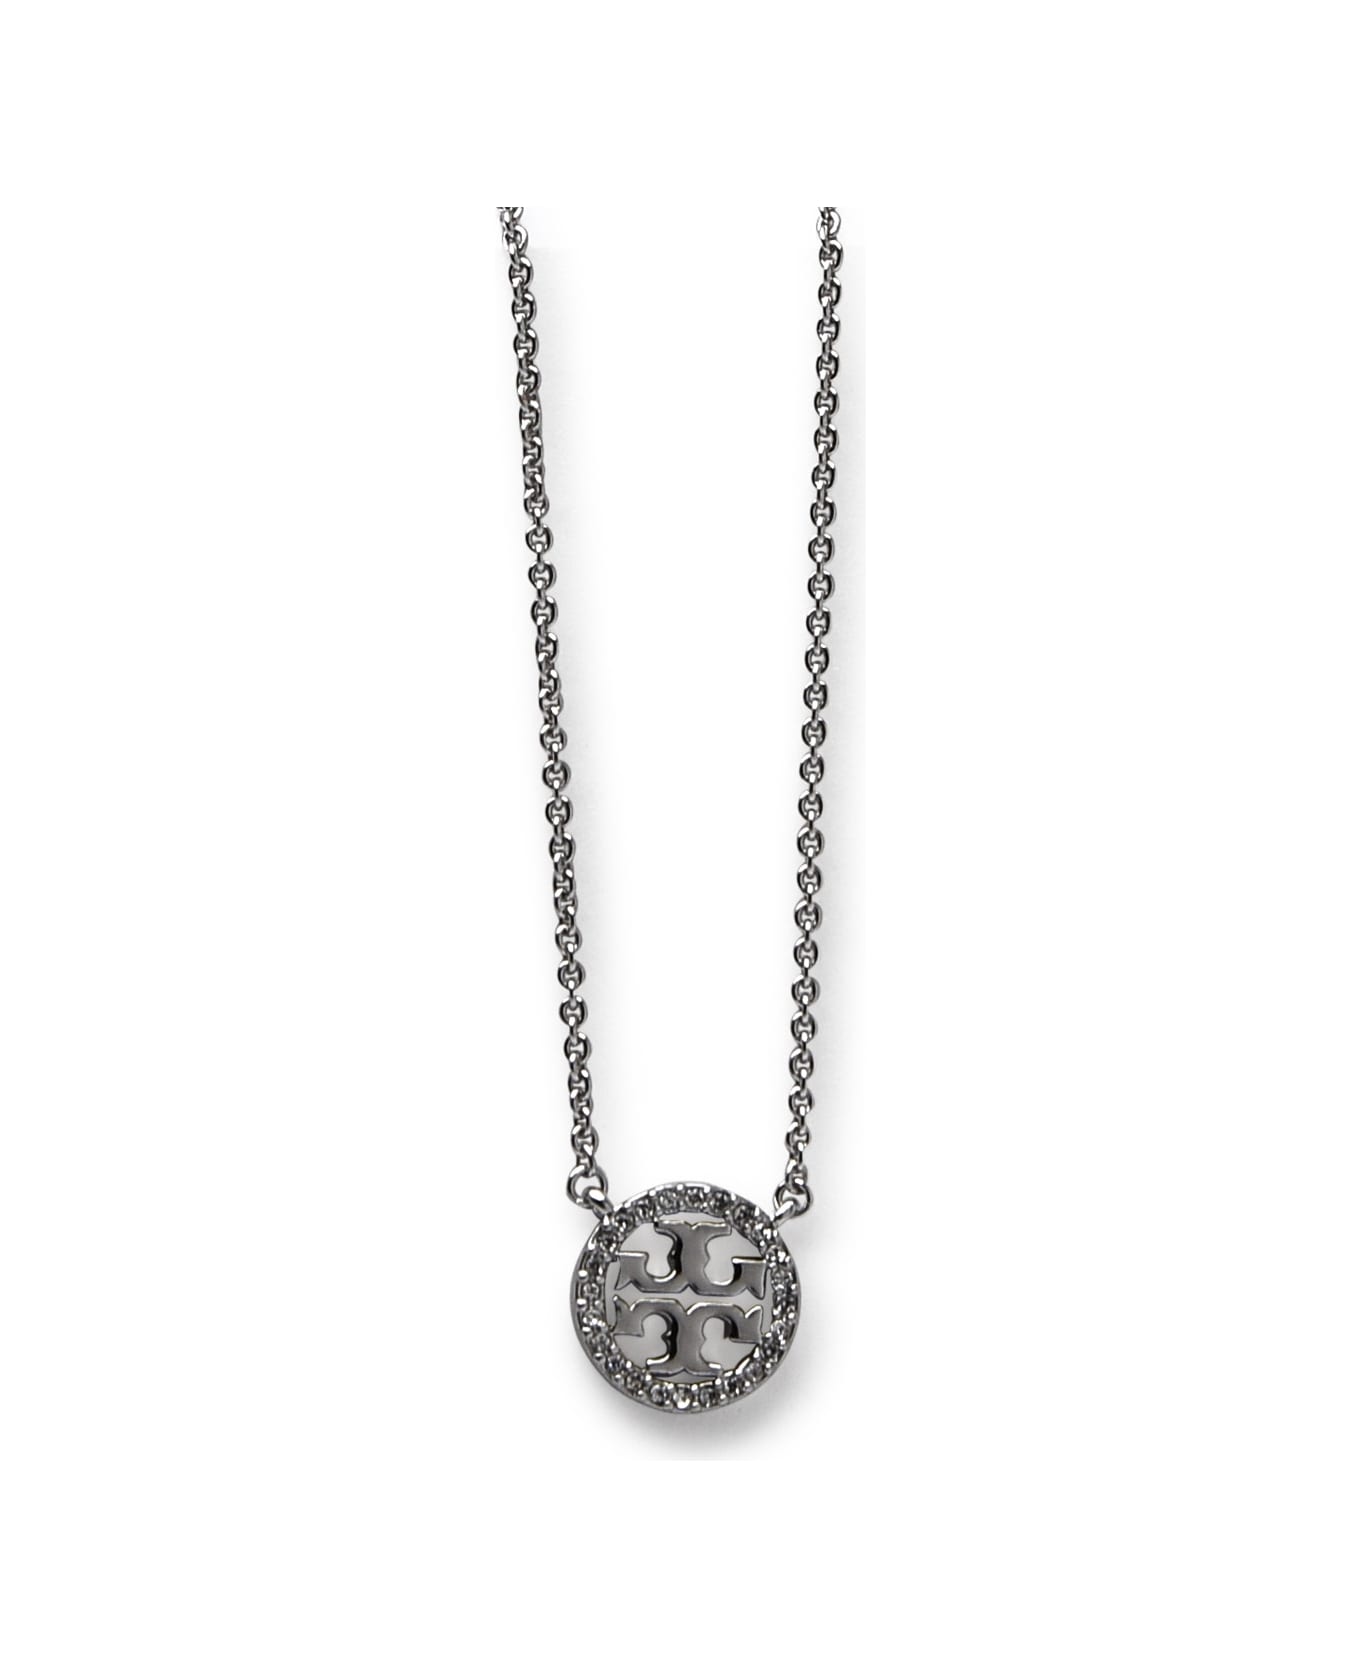 Tory Burch Miller Necklace - Silver ネックレス